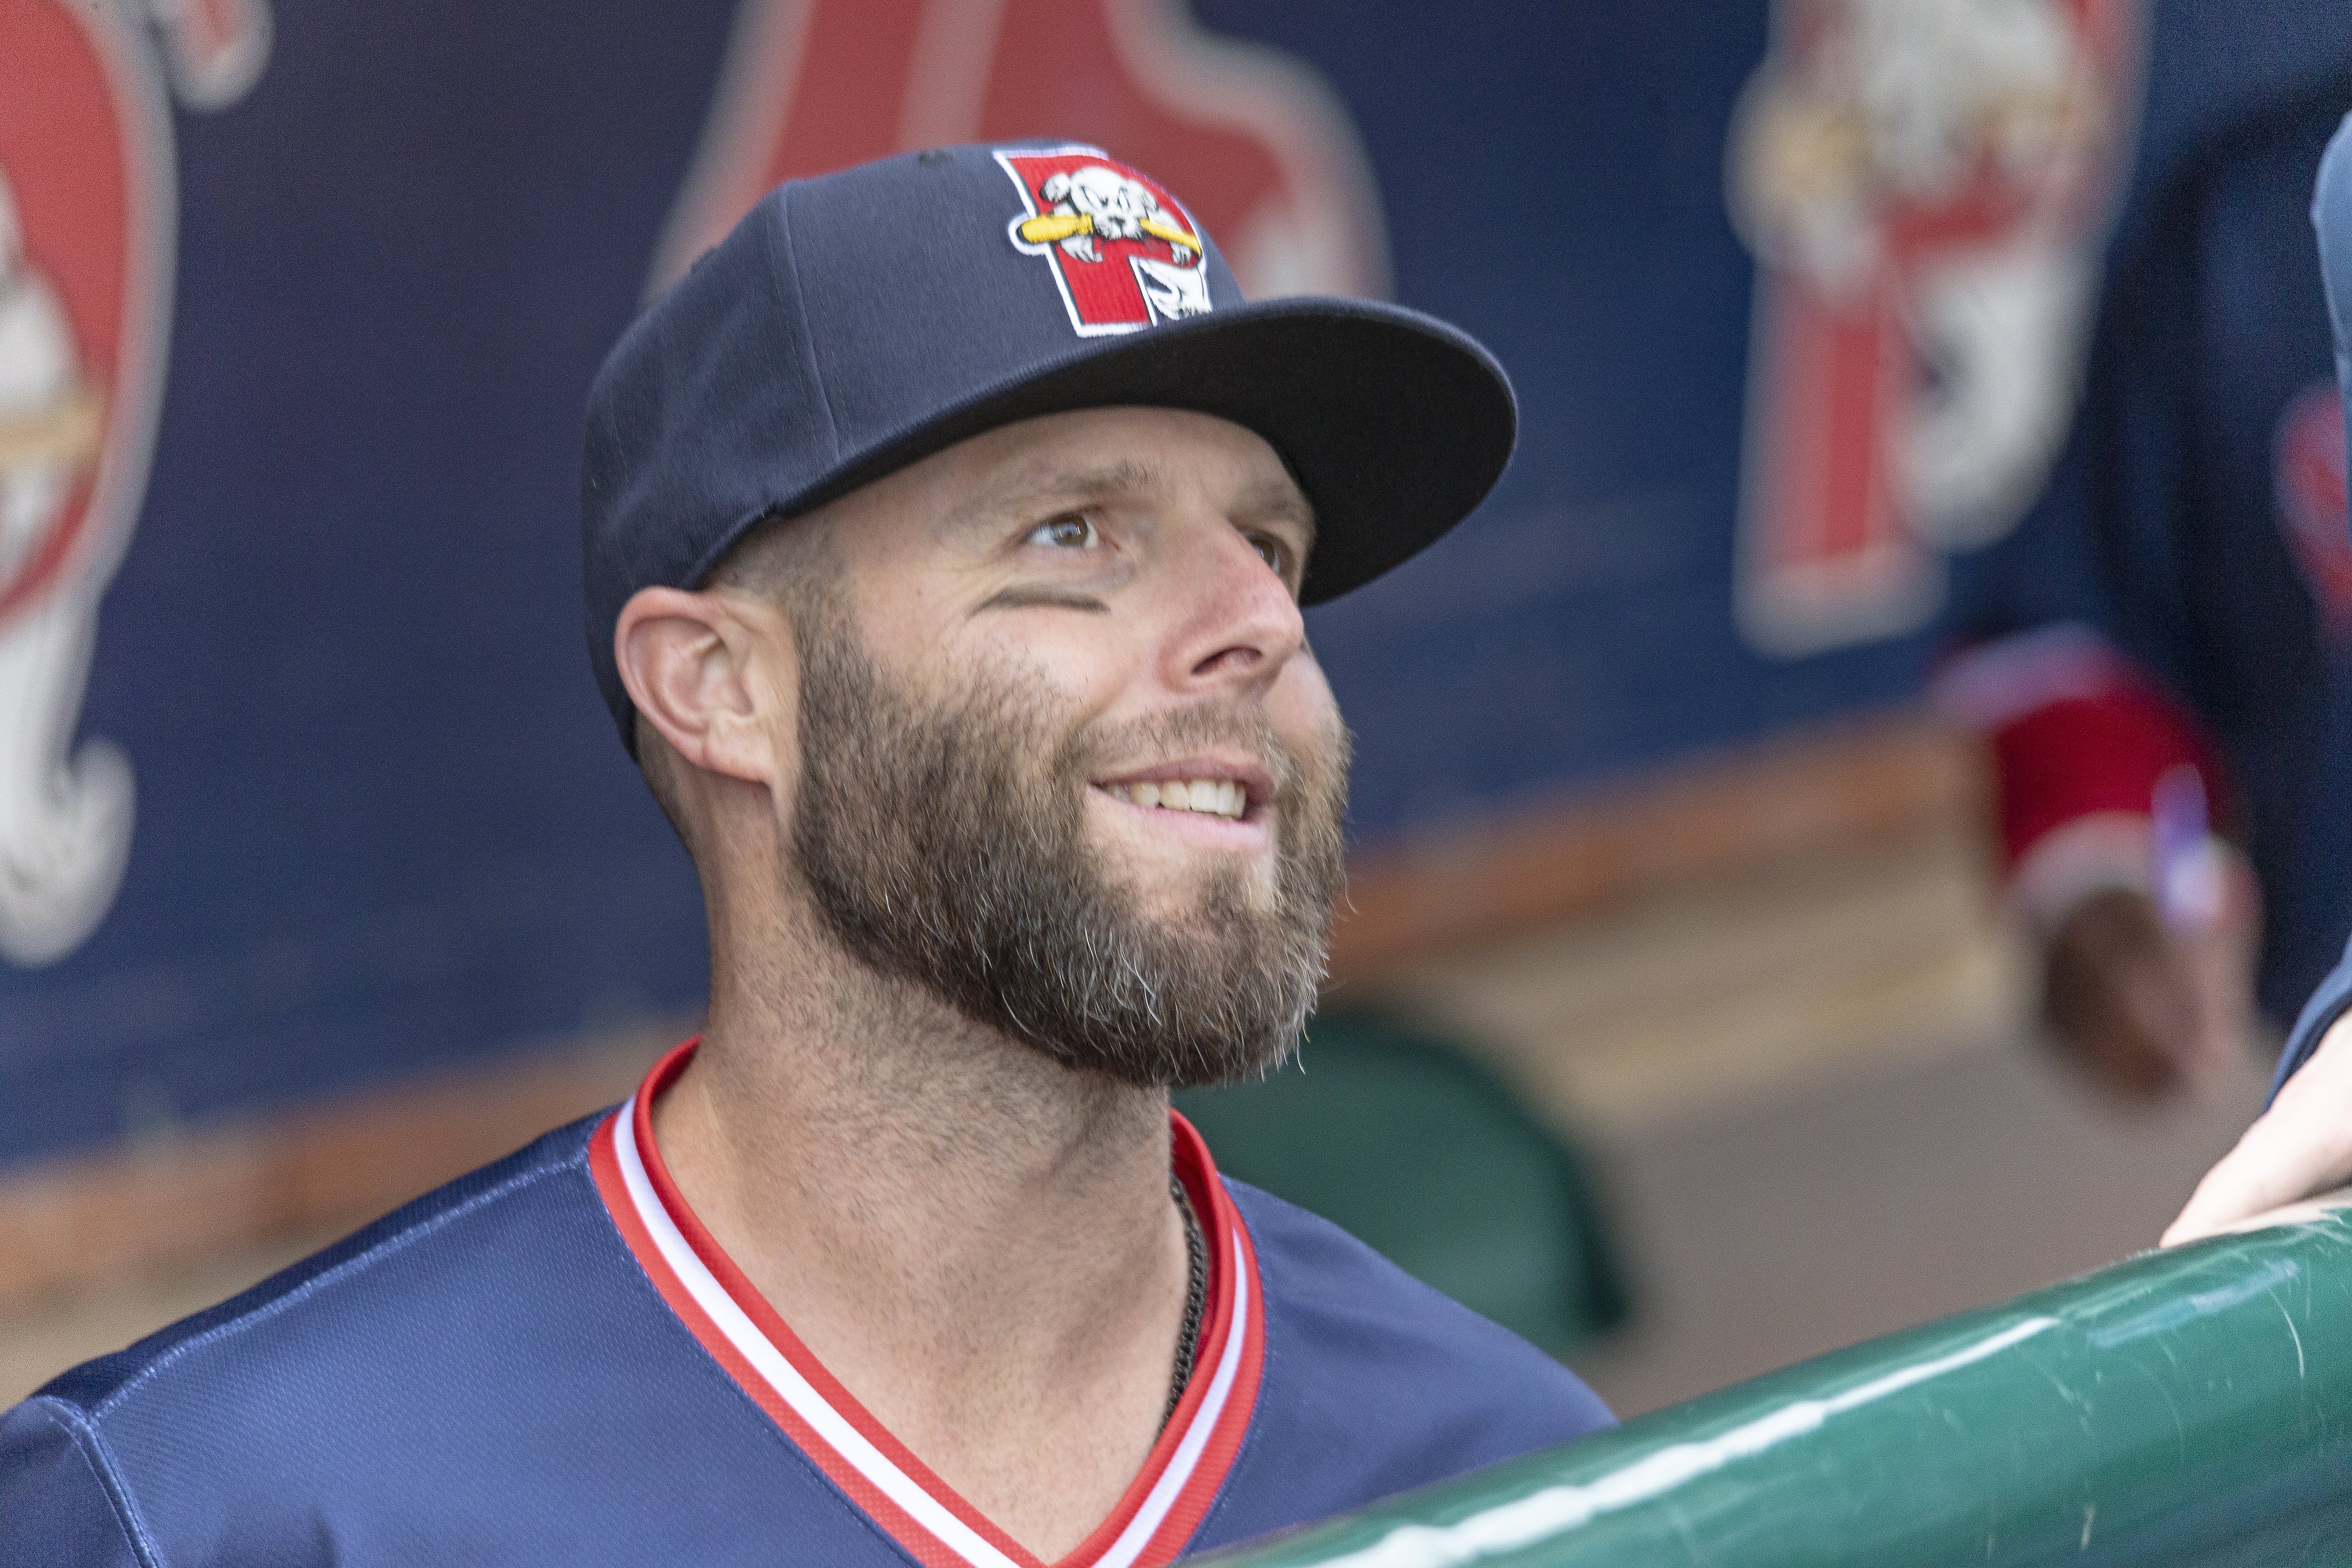 Dustin Pedroia plays inning in 1st game since May – Daily Democrat